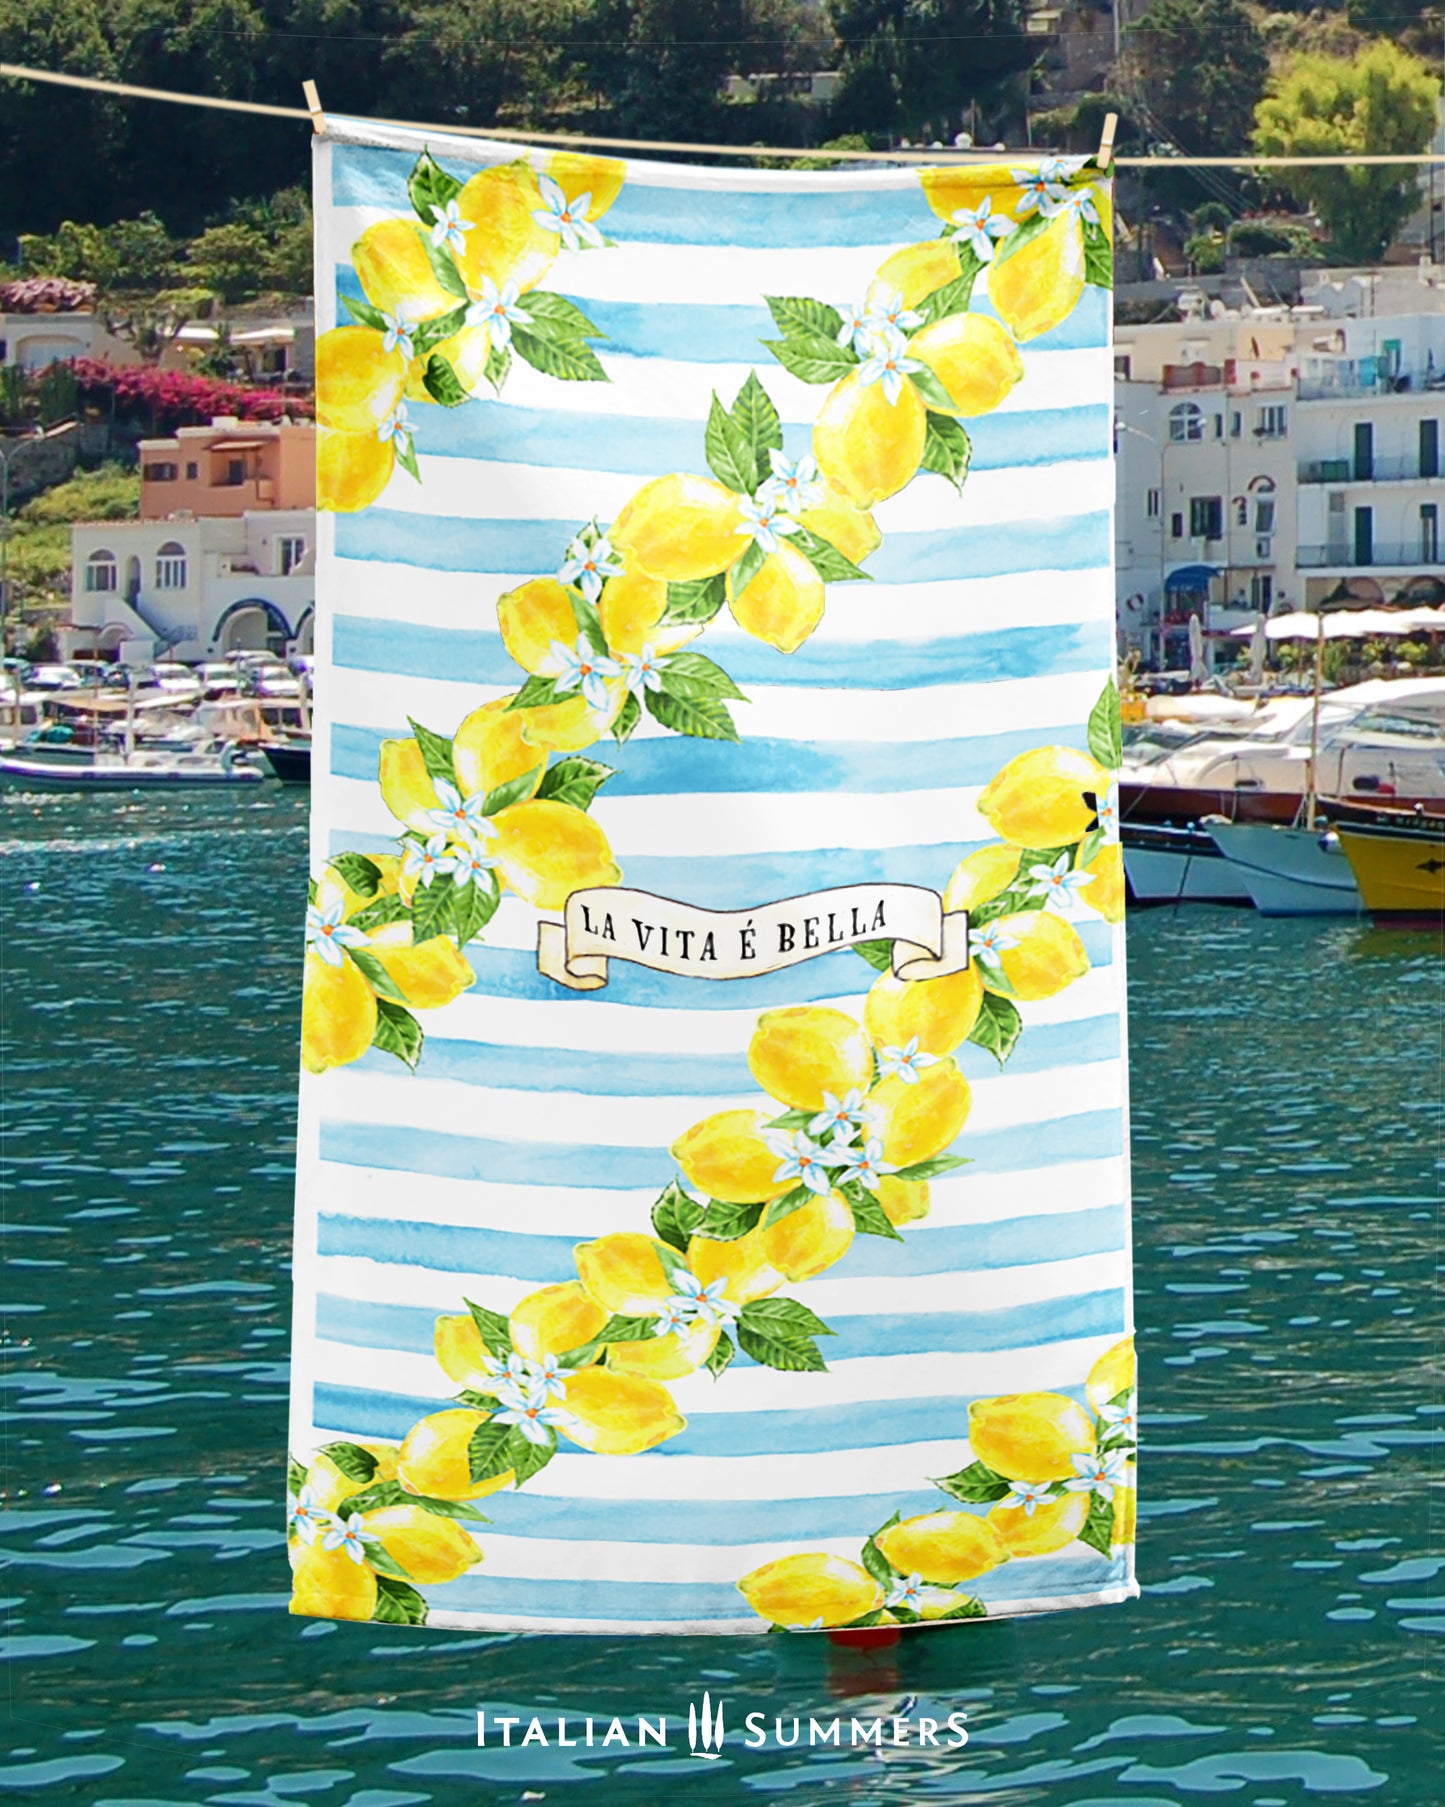 Dive into summer with this delightfully Italian beach towel! With its wreaths of bright lemons against a backdrop of light blue stripes, its cute design screams 'la vita 'e bella!' - perfect for Italy lovers, travelers, and anyone looking for a slice of the Amalfi Coast!